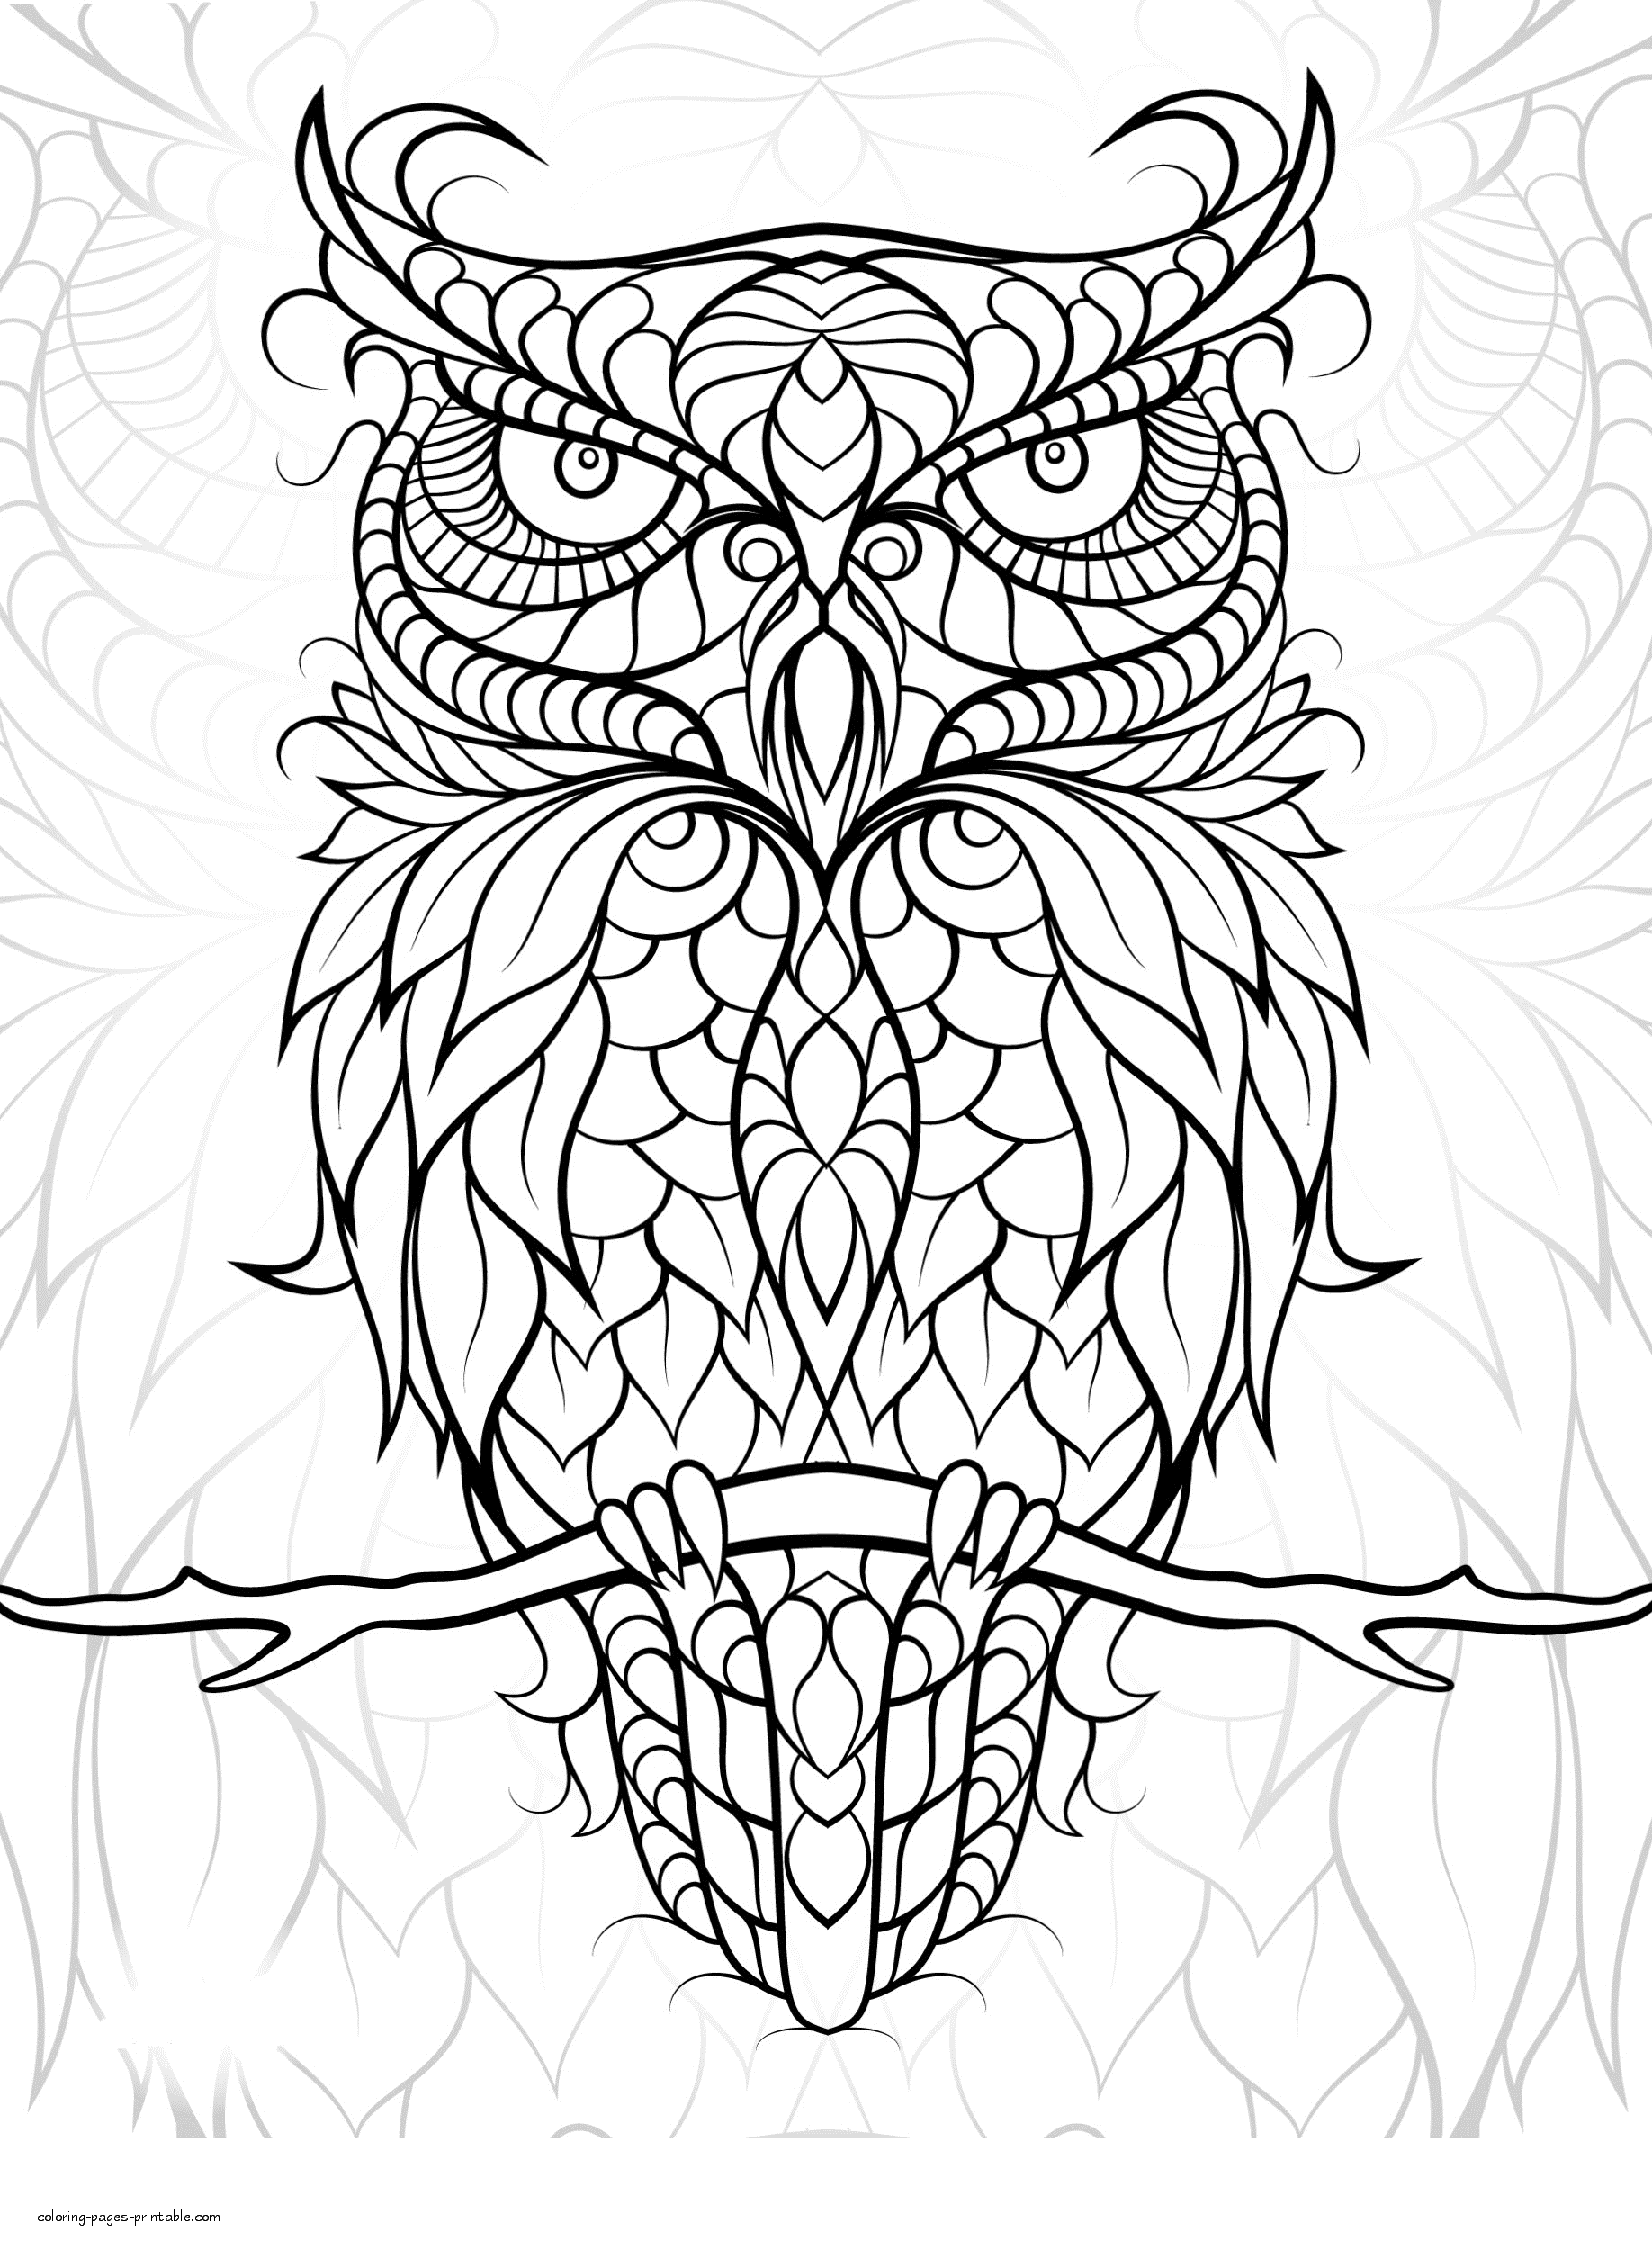 Free Printable Bird Coloring Pages For Adults COLORING PAGES PRINTABLE COM